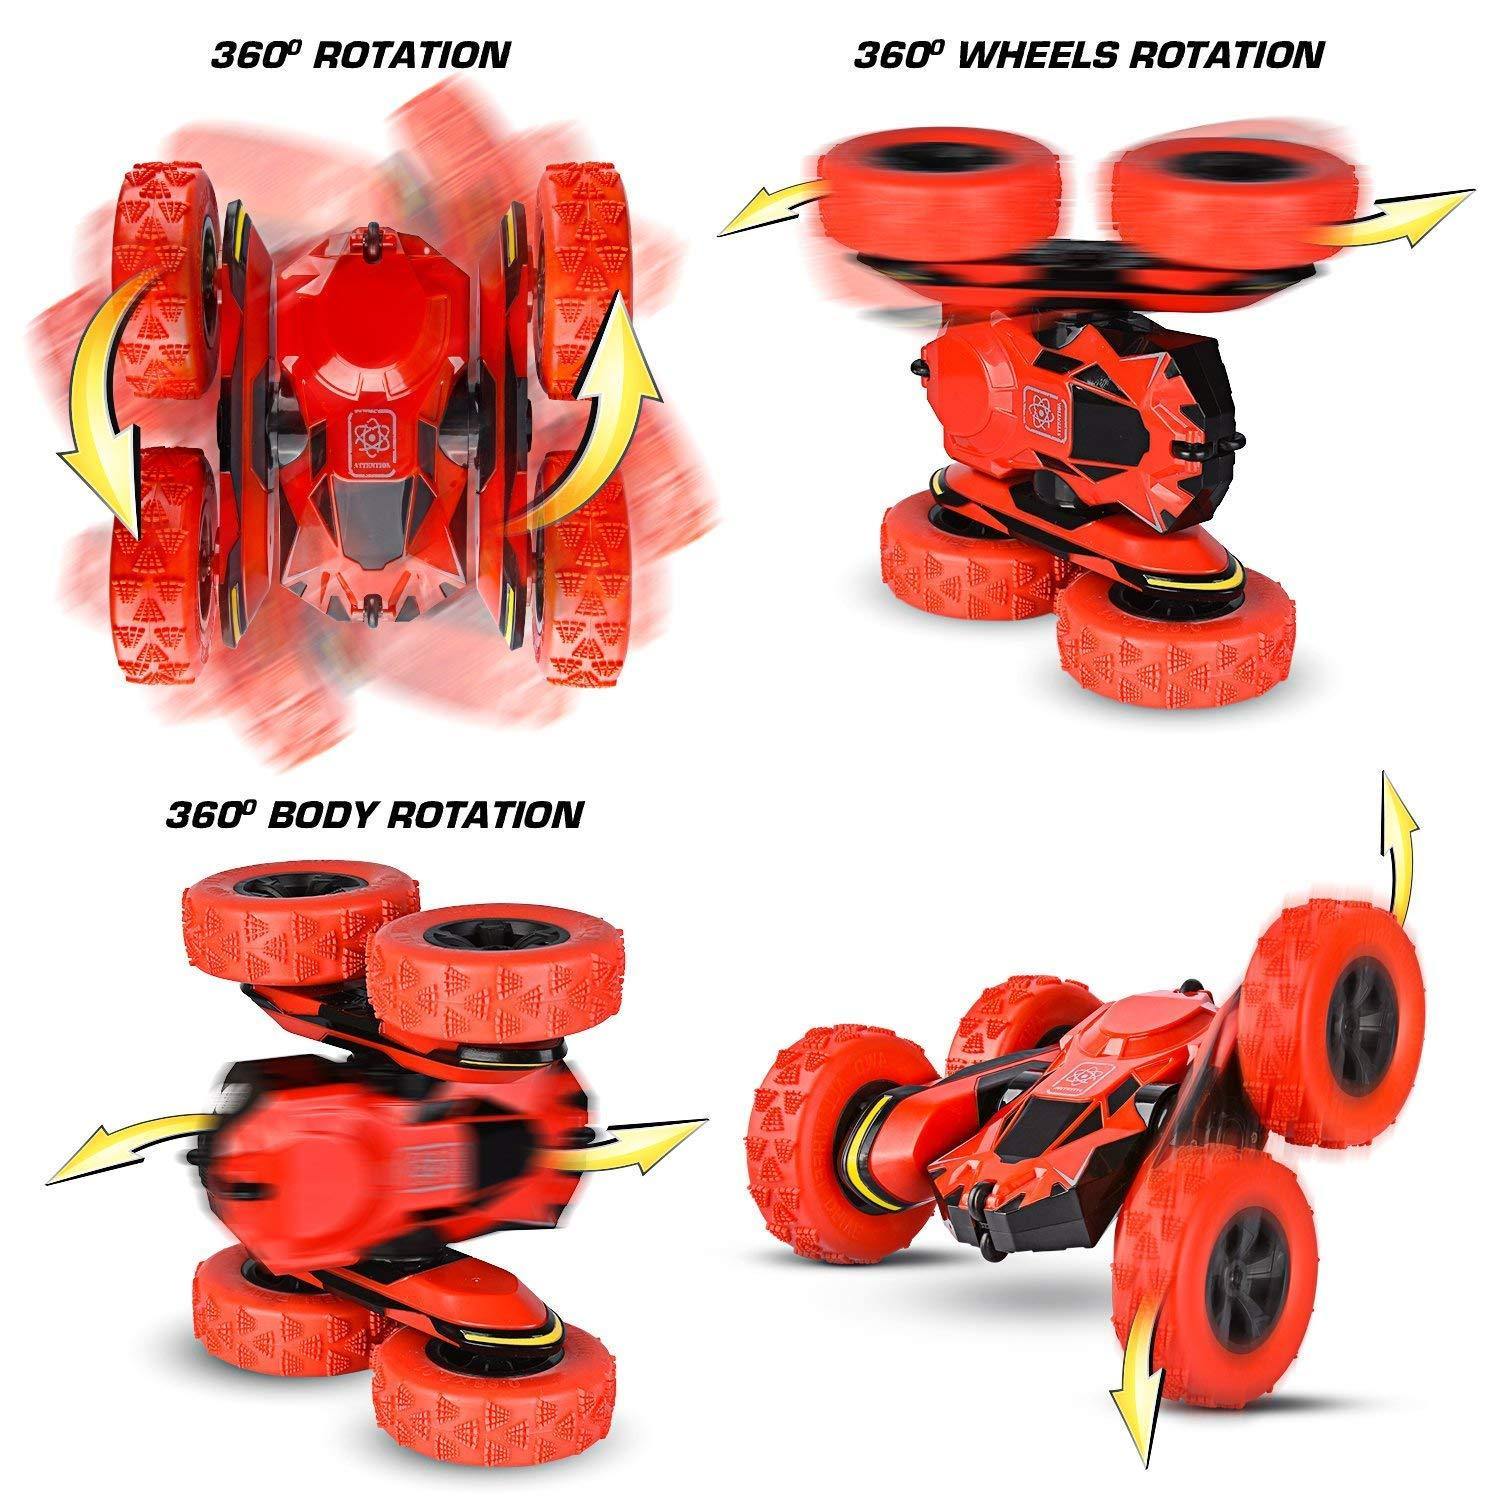 Bosonshop 2.4G Stunt RC Car Double Sided Rotating Tumbling 4WD Remote Control Monster Truck